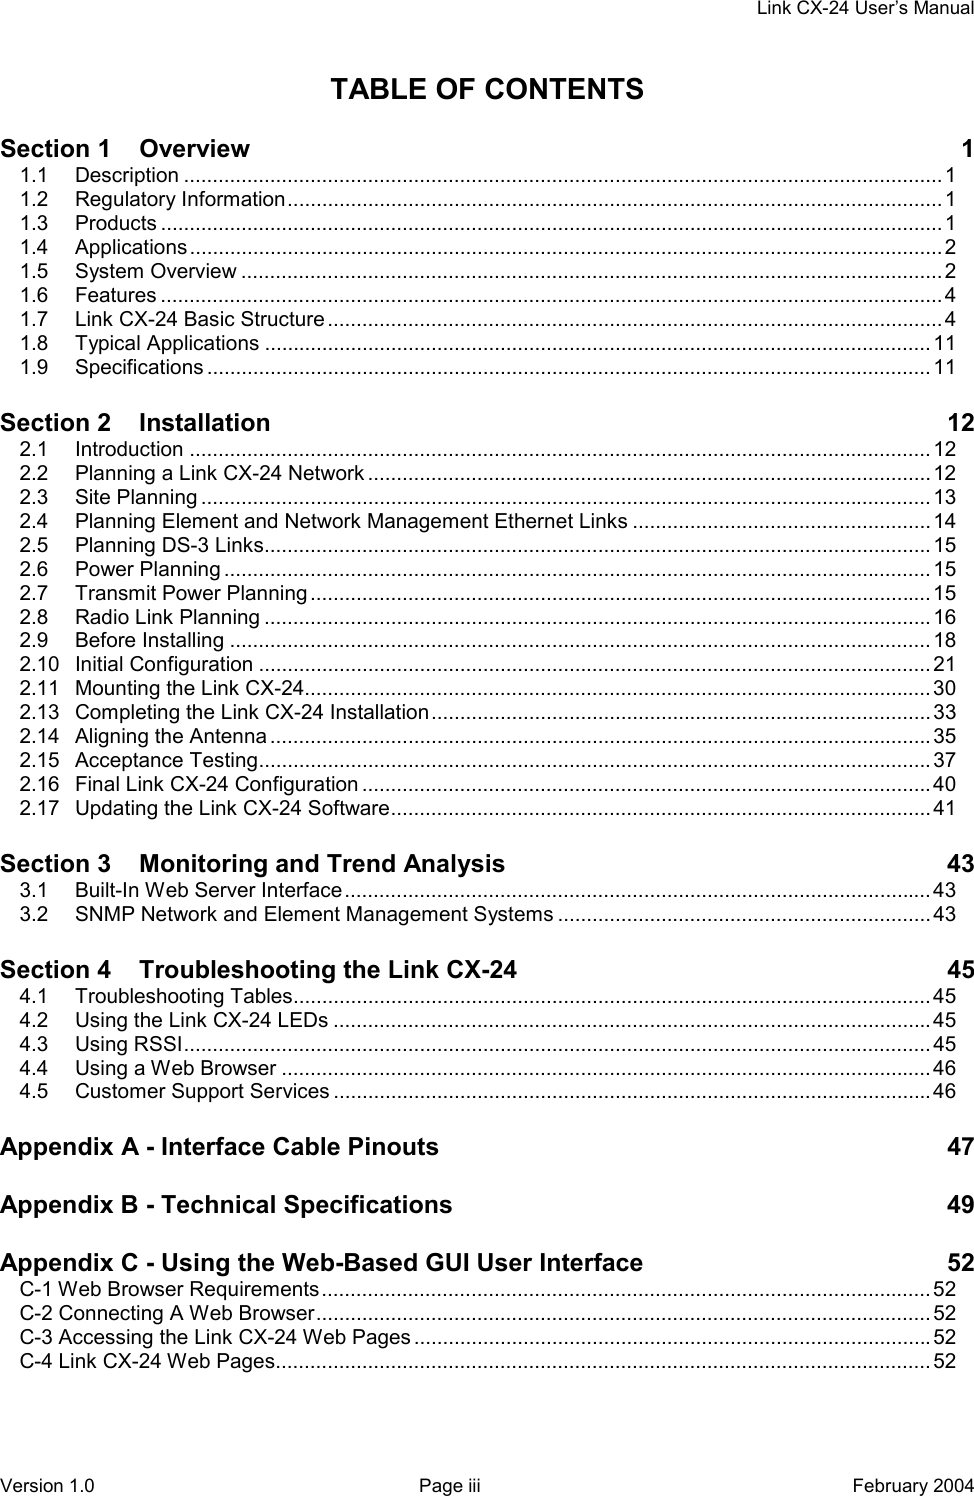     Link CX-24 User’s Manual Version 1.0  Page iii  February 2004 TABLE OF CONTENTS Section 1    Overview  1 1.1 Description ....................................................................................................................................1 1.2 Regulatory Information.................................................................................................................. 1 1.3 Products ........................................................................................................................................1 1.4 Applications...................................................................................................................................2 1.5 System Overview ..........................................................................................................................2 1.6 Features ........................................................................................................................................4 1.7 Link CX-24 Basic Structure ...........................................................................................................4 1.8 Typical Applications ....................................................................................................................11 1.9 Specifications ..............................................................................................................................11 Section 2    Installation 12 2.1 Introduction .................................................................................................................................12 2.2 Planning a Link CX-24 Network ..................................................................................................12 2.3 Site Planning ...............................................................................................................................13 2.4 Planning Element and Network Management Ethernet Links ....................................................14 2.5 Planning DS-3 Links....................................................................................................................15 2.6 Power Planning ...........................................................................................................................15 2.7 Transmit Power Planning ............................................................................................................15 2.8 Radio Link Planning .................................................................................................................... 16 2.9 Before Installing ..........................................................................................................................18 2.10 Initial Configuration .....................................................................................................................21 2.11 Mounting the Link CX-24.............................................................................................................30 2.13 Completing the Link CX-24 Installation.......................................................................................33 2.14 Aligning the Antenna ...................................................................................................................35 2.15 Acceptance Testing.....................................................................................................................37 2.16 Final Link CX-24 Configuration ...................................................................................................40 2.17 Updating the Link CX-24 Software..............................................................................................41 Section 3    Monitoring and Trend Analysis  43 3.1 Built-In Web Server Interface...................................................................................................... 43 3.2 SNMP Network and Element Management Systems .................................................................43 Section 4    Troubleshooting the Link CX-24  45 4.1 Troubleshooting Tables............................................................................................................... 45 4.2 Using the Link CX-24 LEDs ........................................................................................................45 4.3 Using RSSI..................................................................................................................................45 4.4 Using a Web Browser .................................................................................................................46 4.5 Customer Support Services ........................................................................................................46 Appendix A - Interface Cable Pinouts  47 Appendix B - Technical Specifications  49 Appendix C - Using the Web-Based GUI User Interface  52 C-1 Web Browser Requirements.......................................................................................................... 52 C-2 Connecting A Web Browser...........................................................................................................52 C-3 Accessing the Link CX-24 Web Pages ..........................................................................................52 C-4 Link CX-24 Web Pages.................................................................................................................. 52 